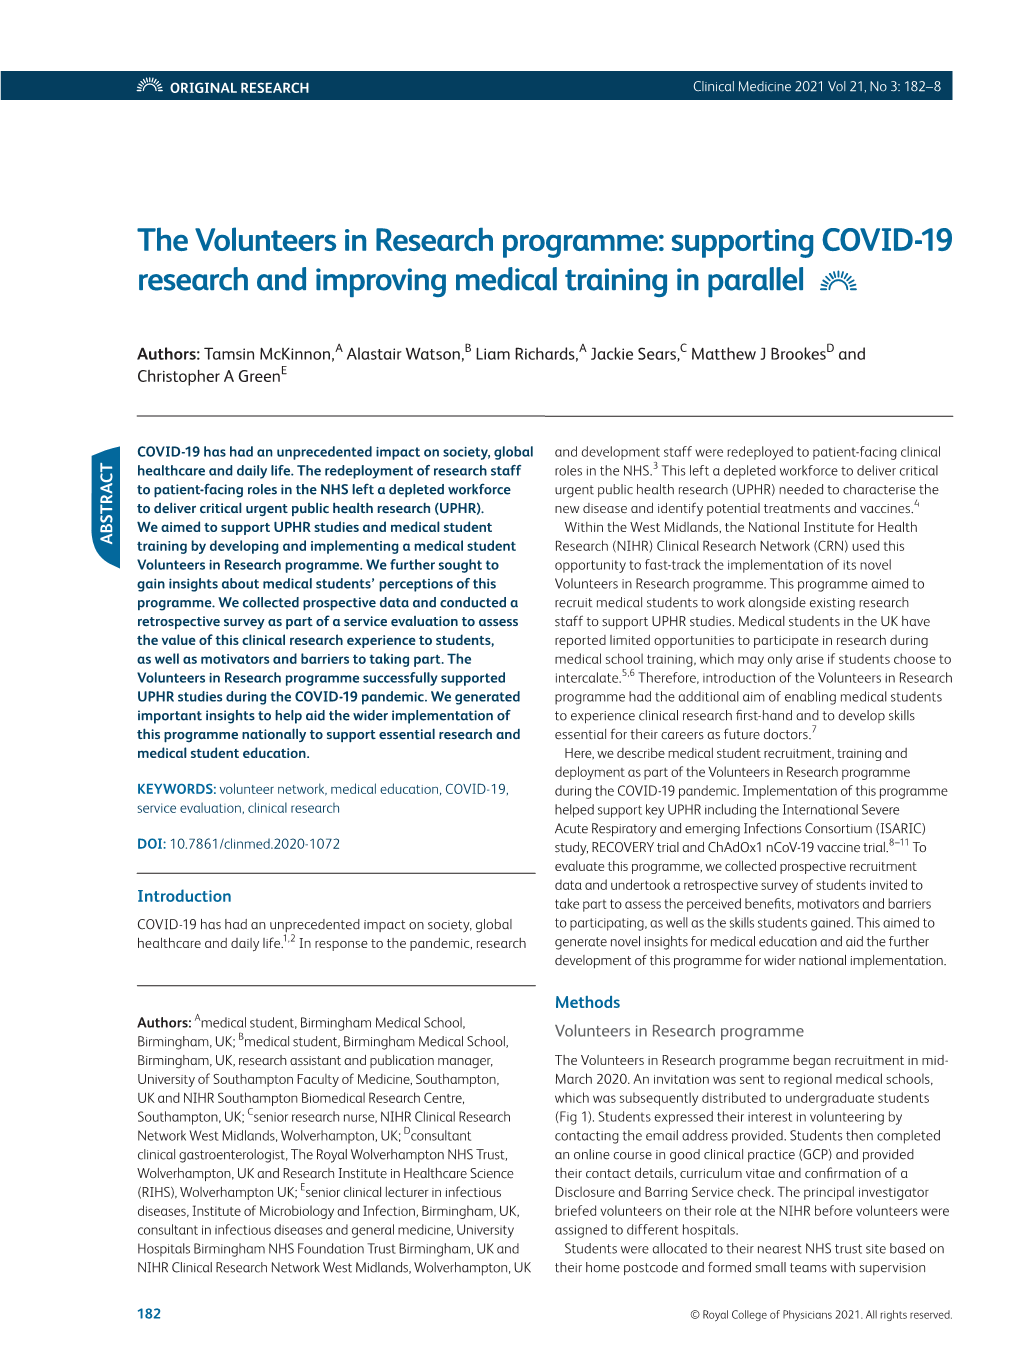 The Volunteers in Research Programme: Supporting COVID-19 Research and Improving Medical Training in Parallel